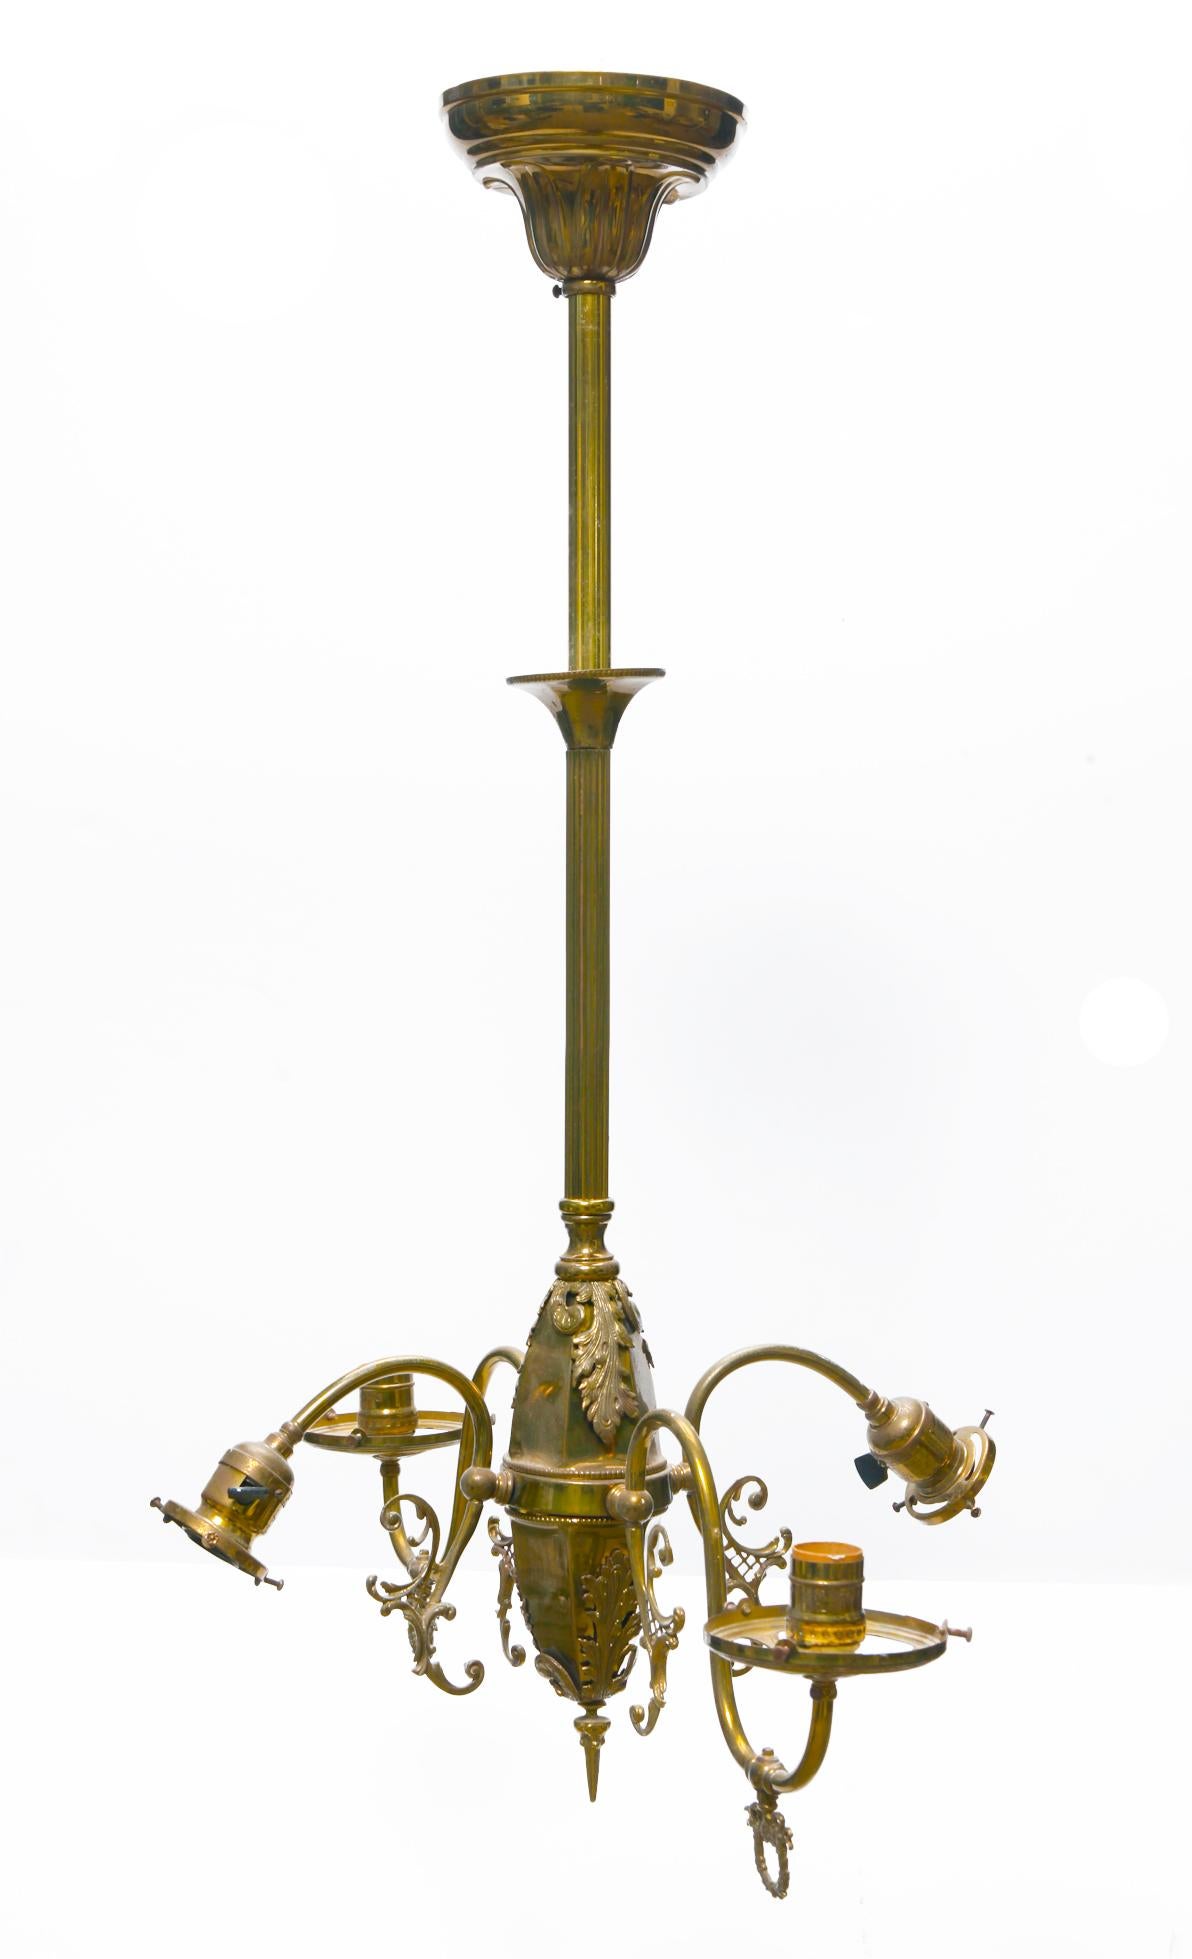 Early Victorian Antique light fixture, incomplete, with a high polished brass finish.   For Sale